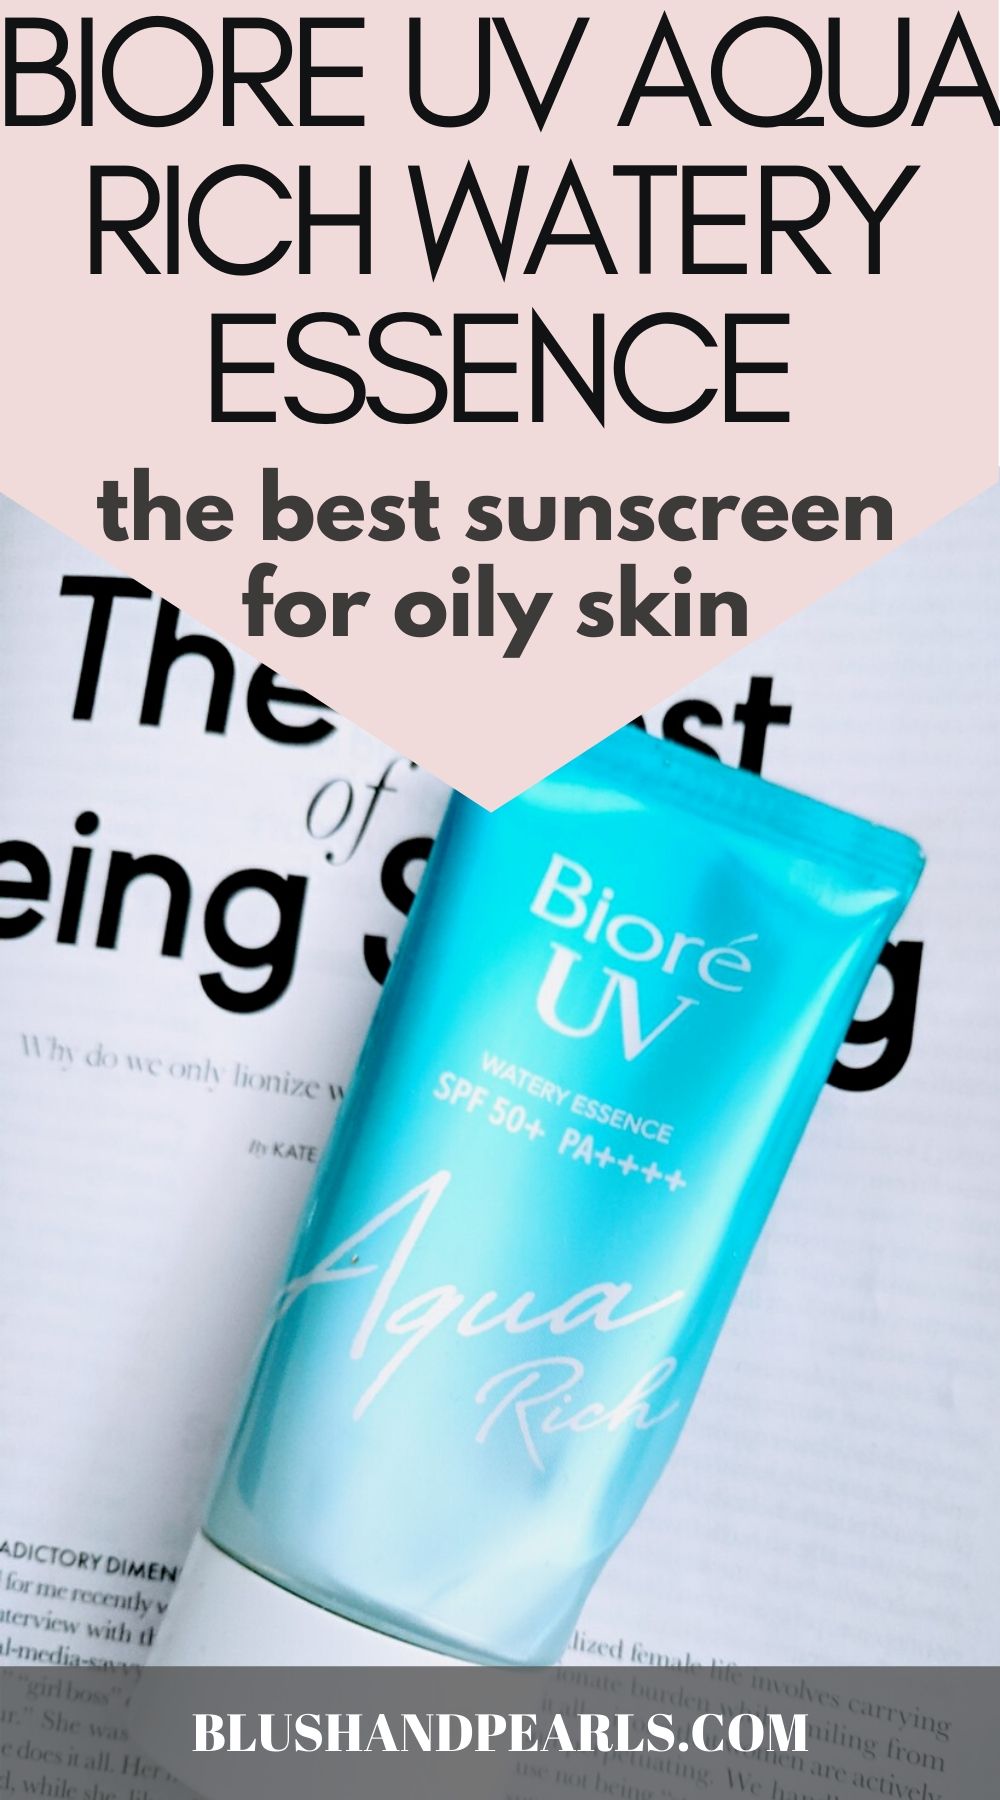 biore uv aqua rich watery essence is the best sunscreen for oily skin